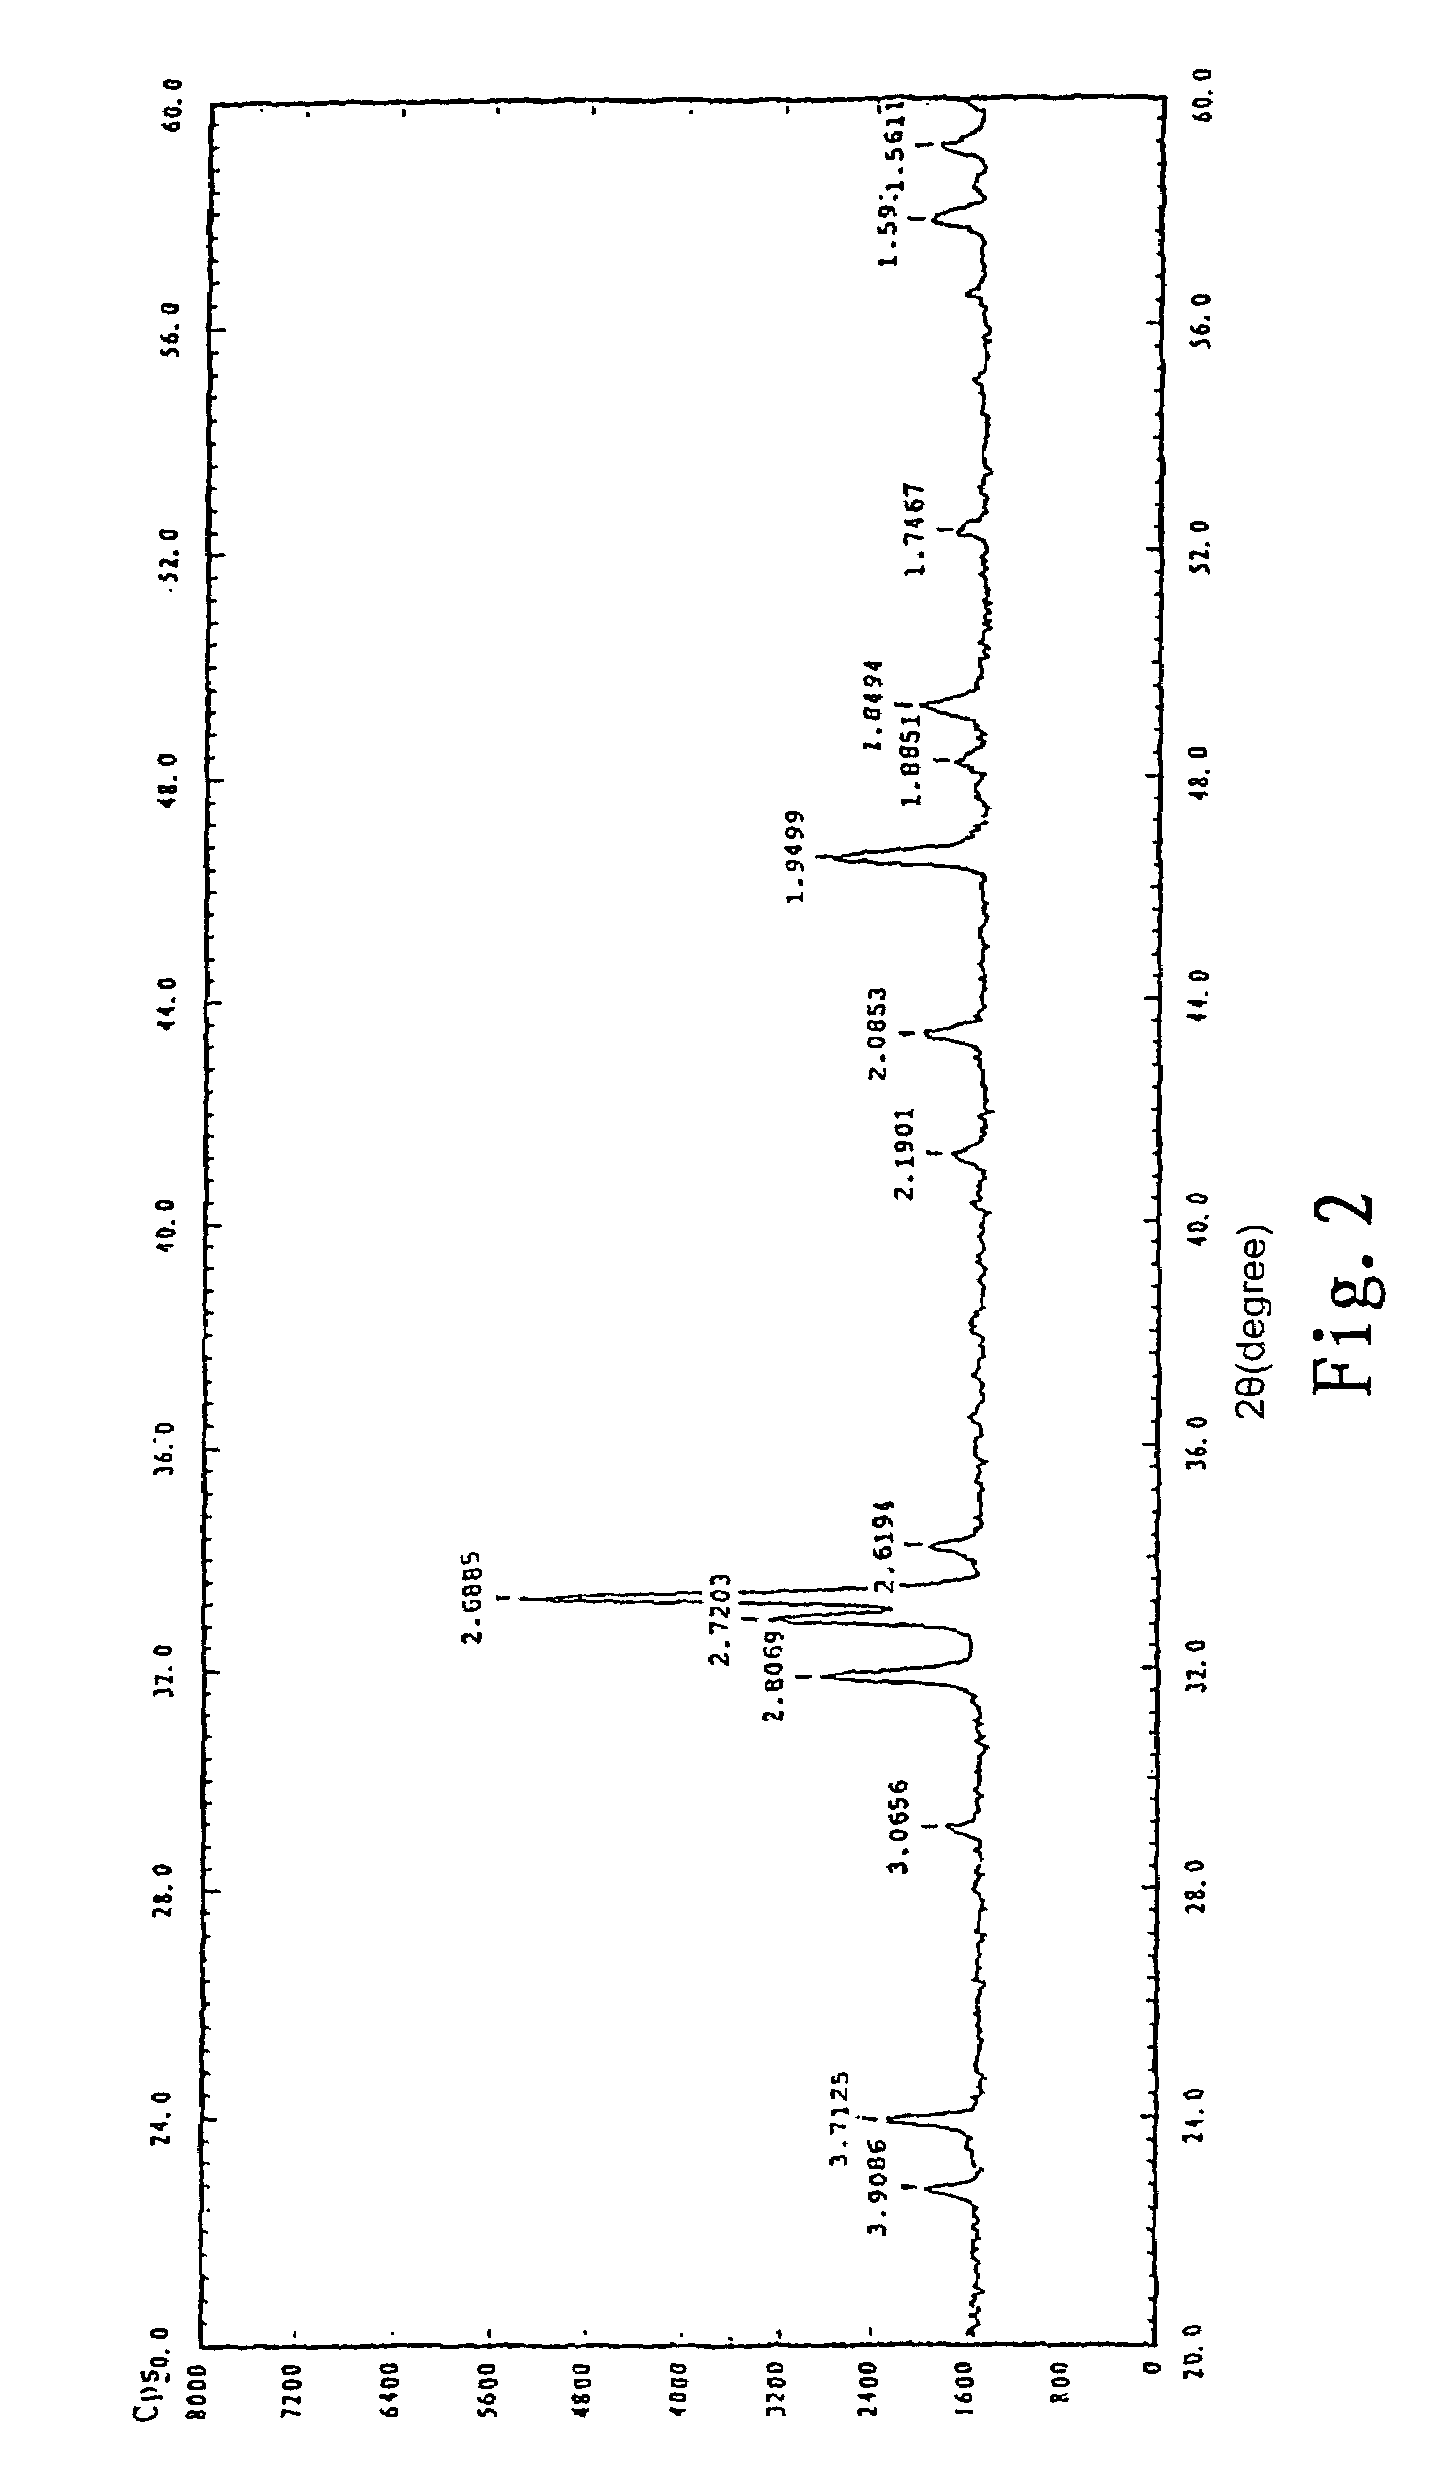 Process for refining liquefied petroleum gas in a commercial scale